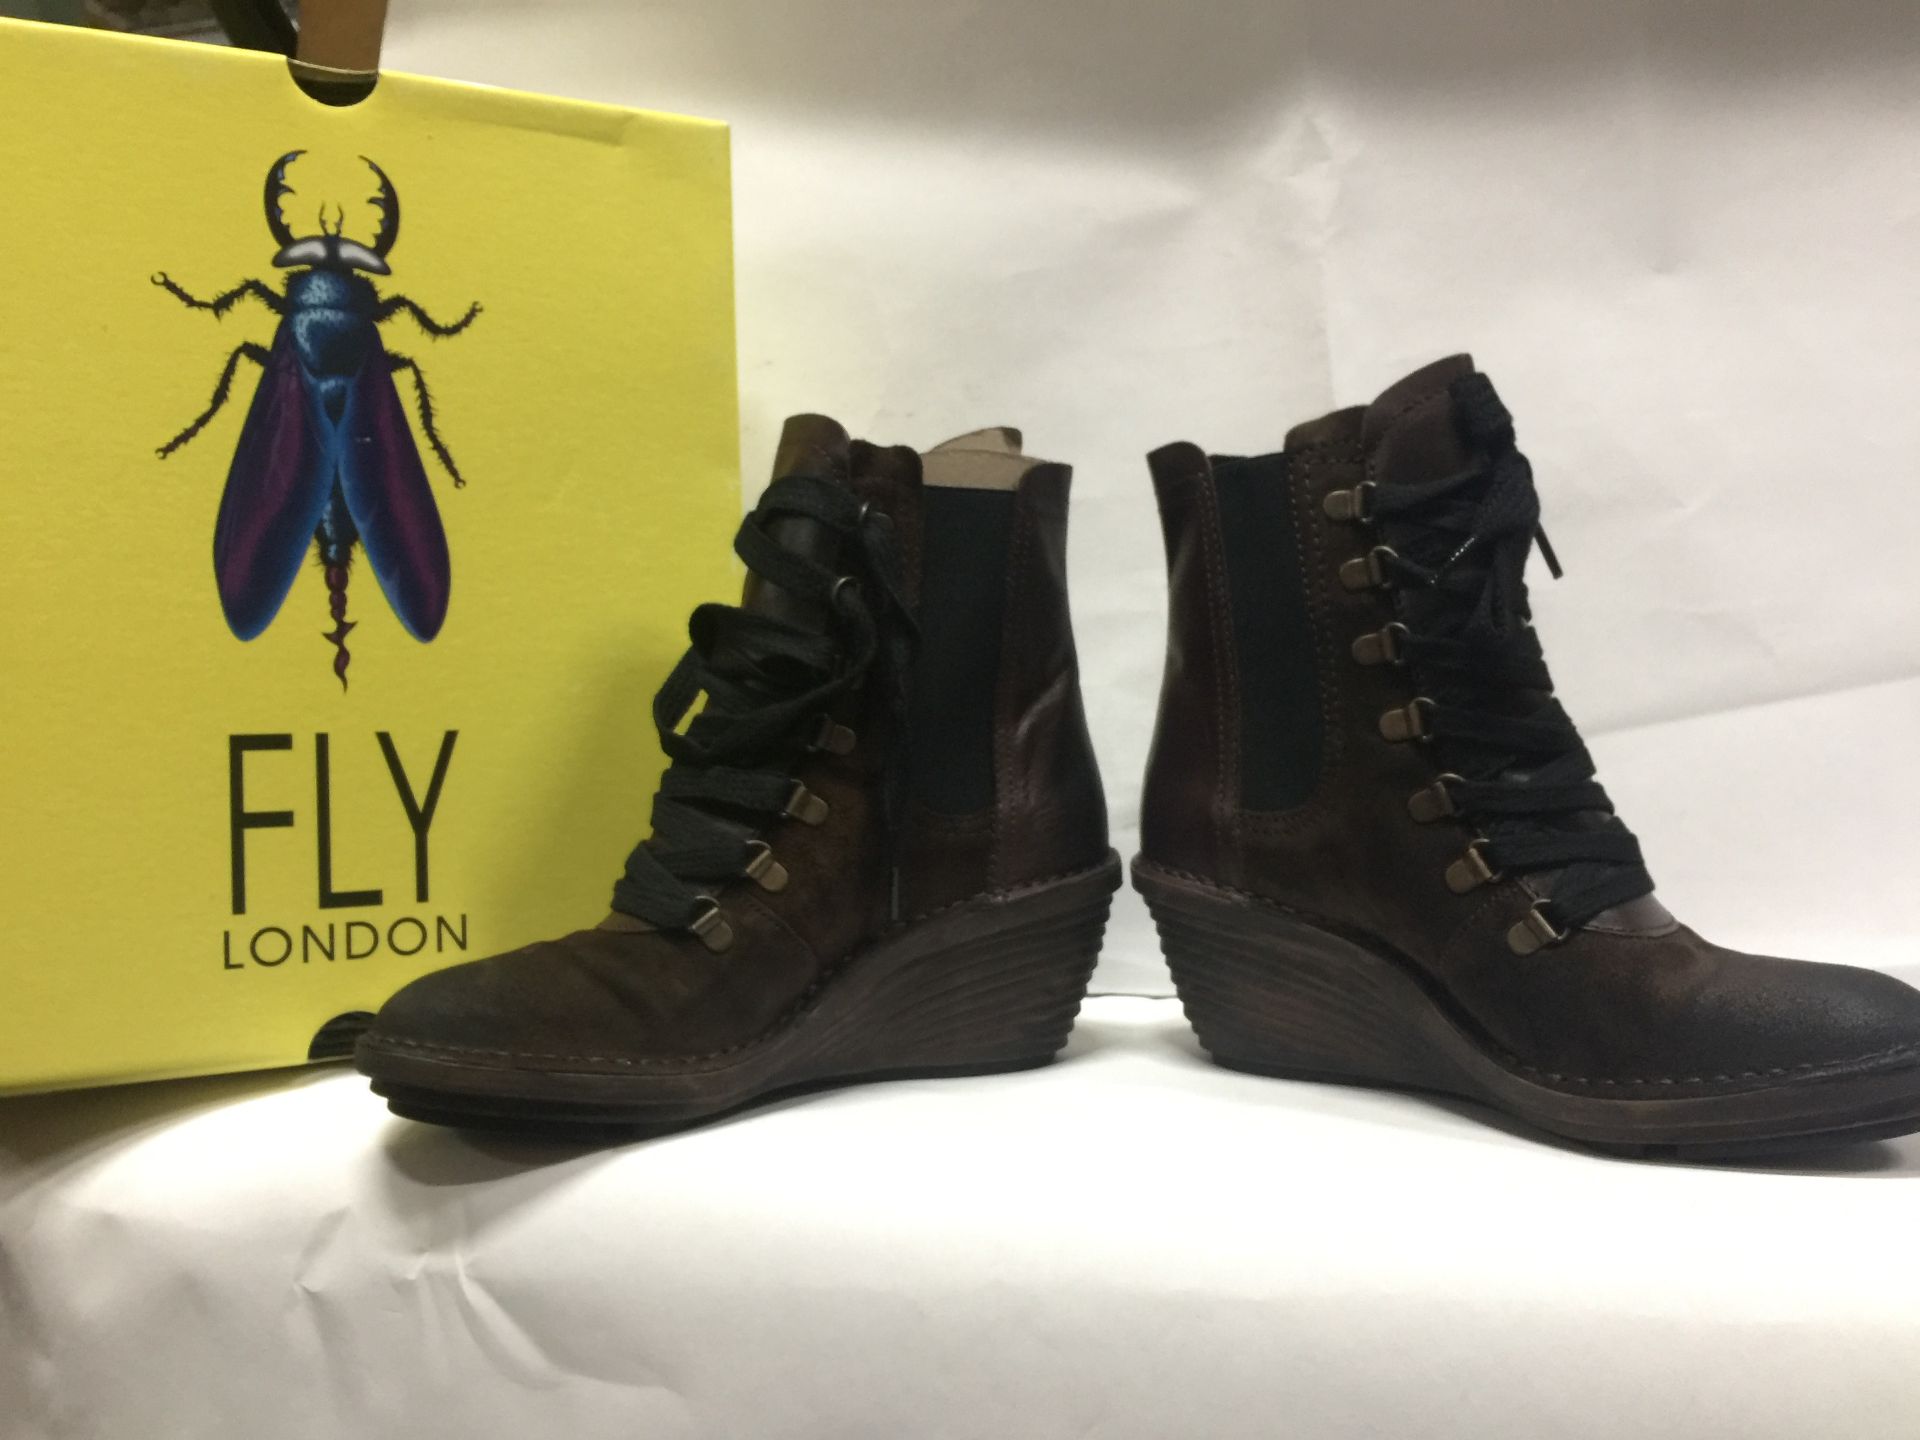 5 x Fly London Women's Boots Mixed Sizes, Styles and Colours Size Ranging EU 37 - EU 42 - Customer R